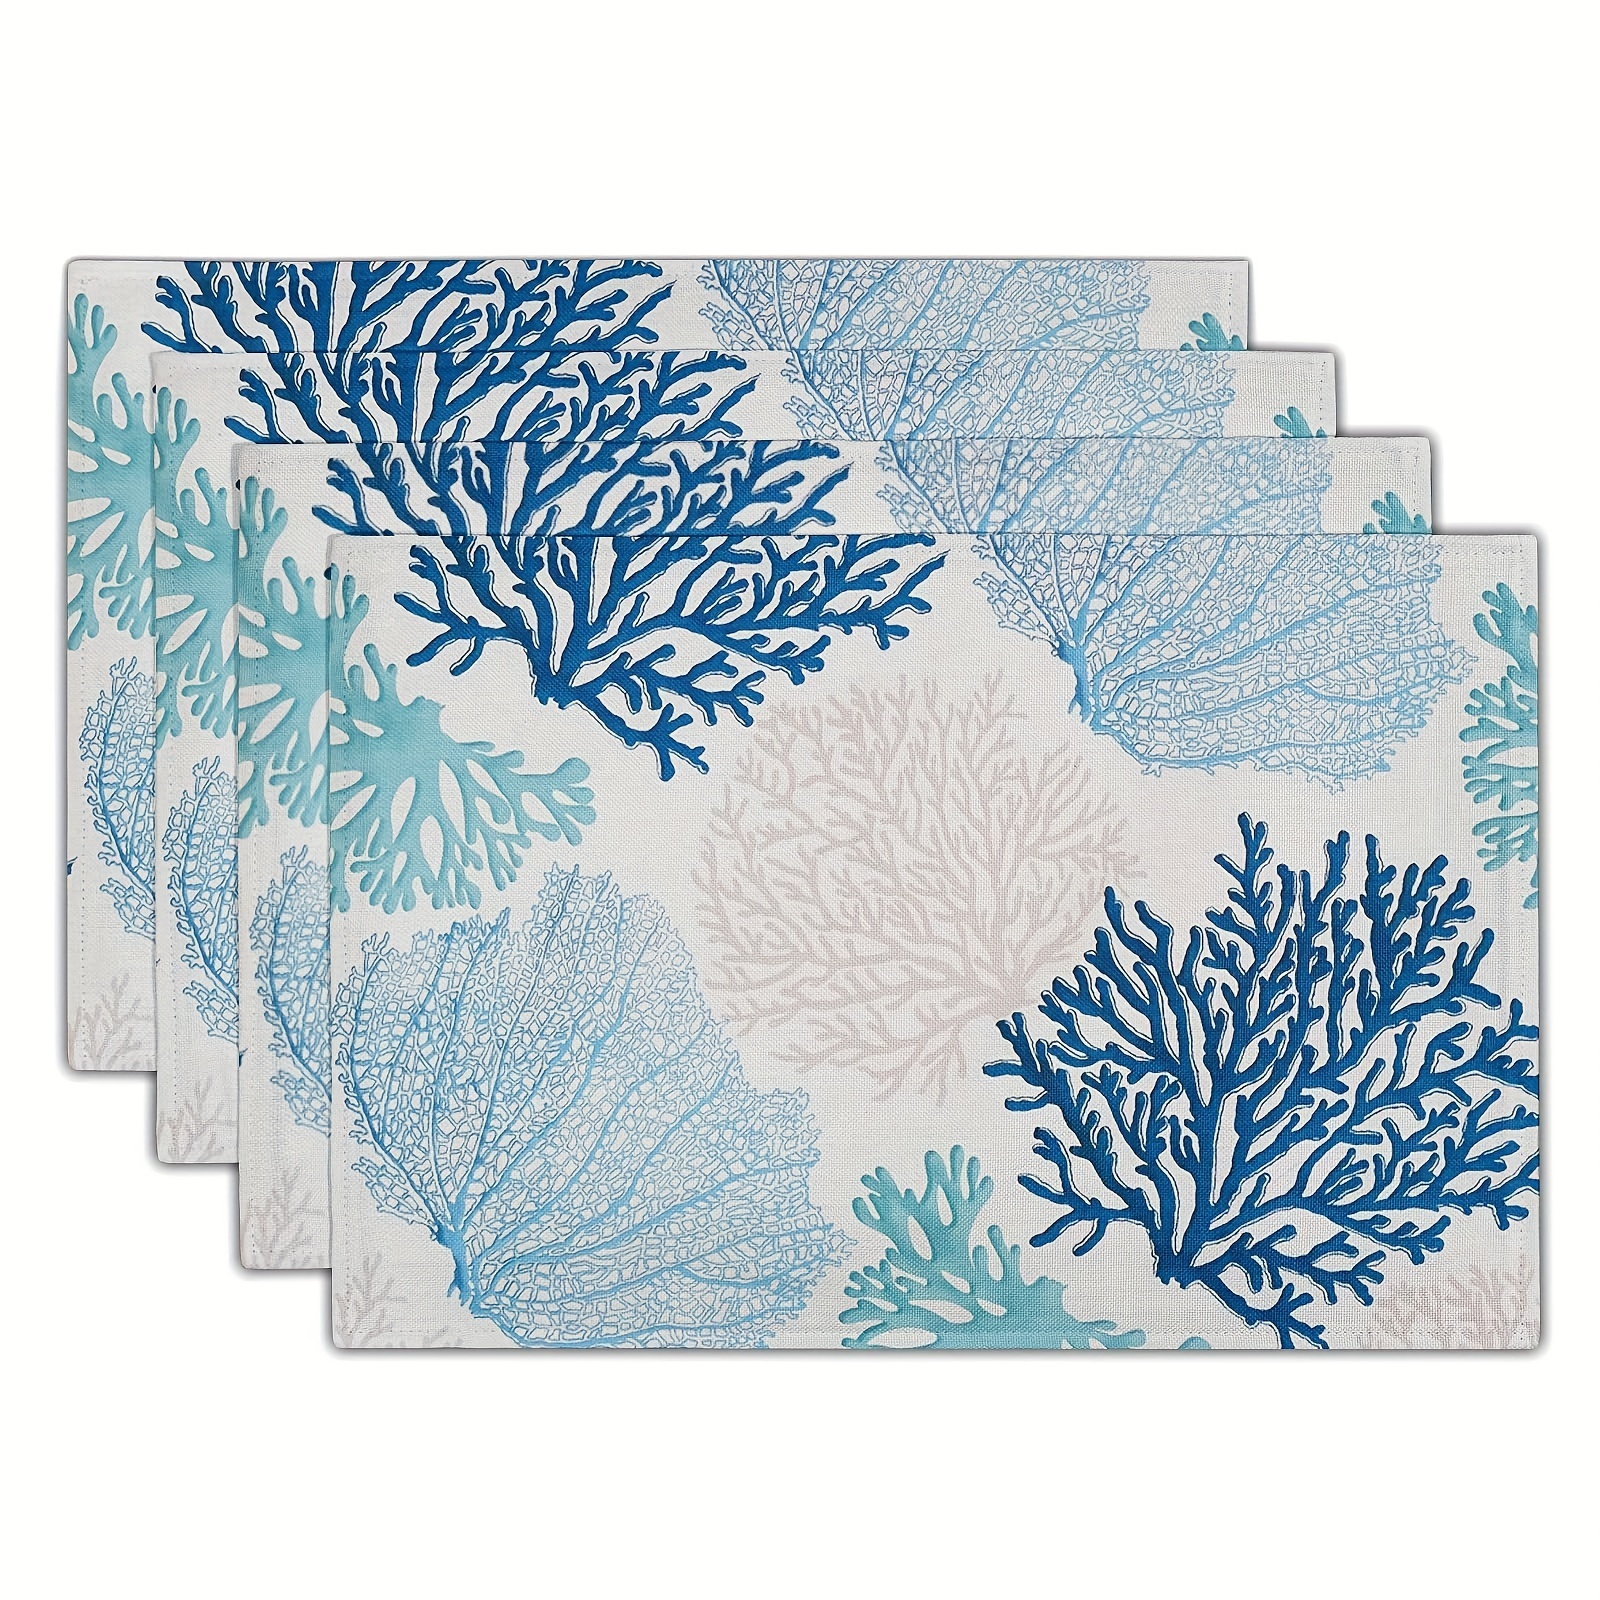 

4pcs, Placemats, Ocean Theme Coral Printed Placemats, Summer Blue White Coral Reef Table Place Mat, Dining Kitchen Decor, Room Decor